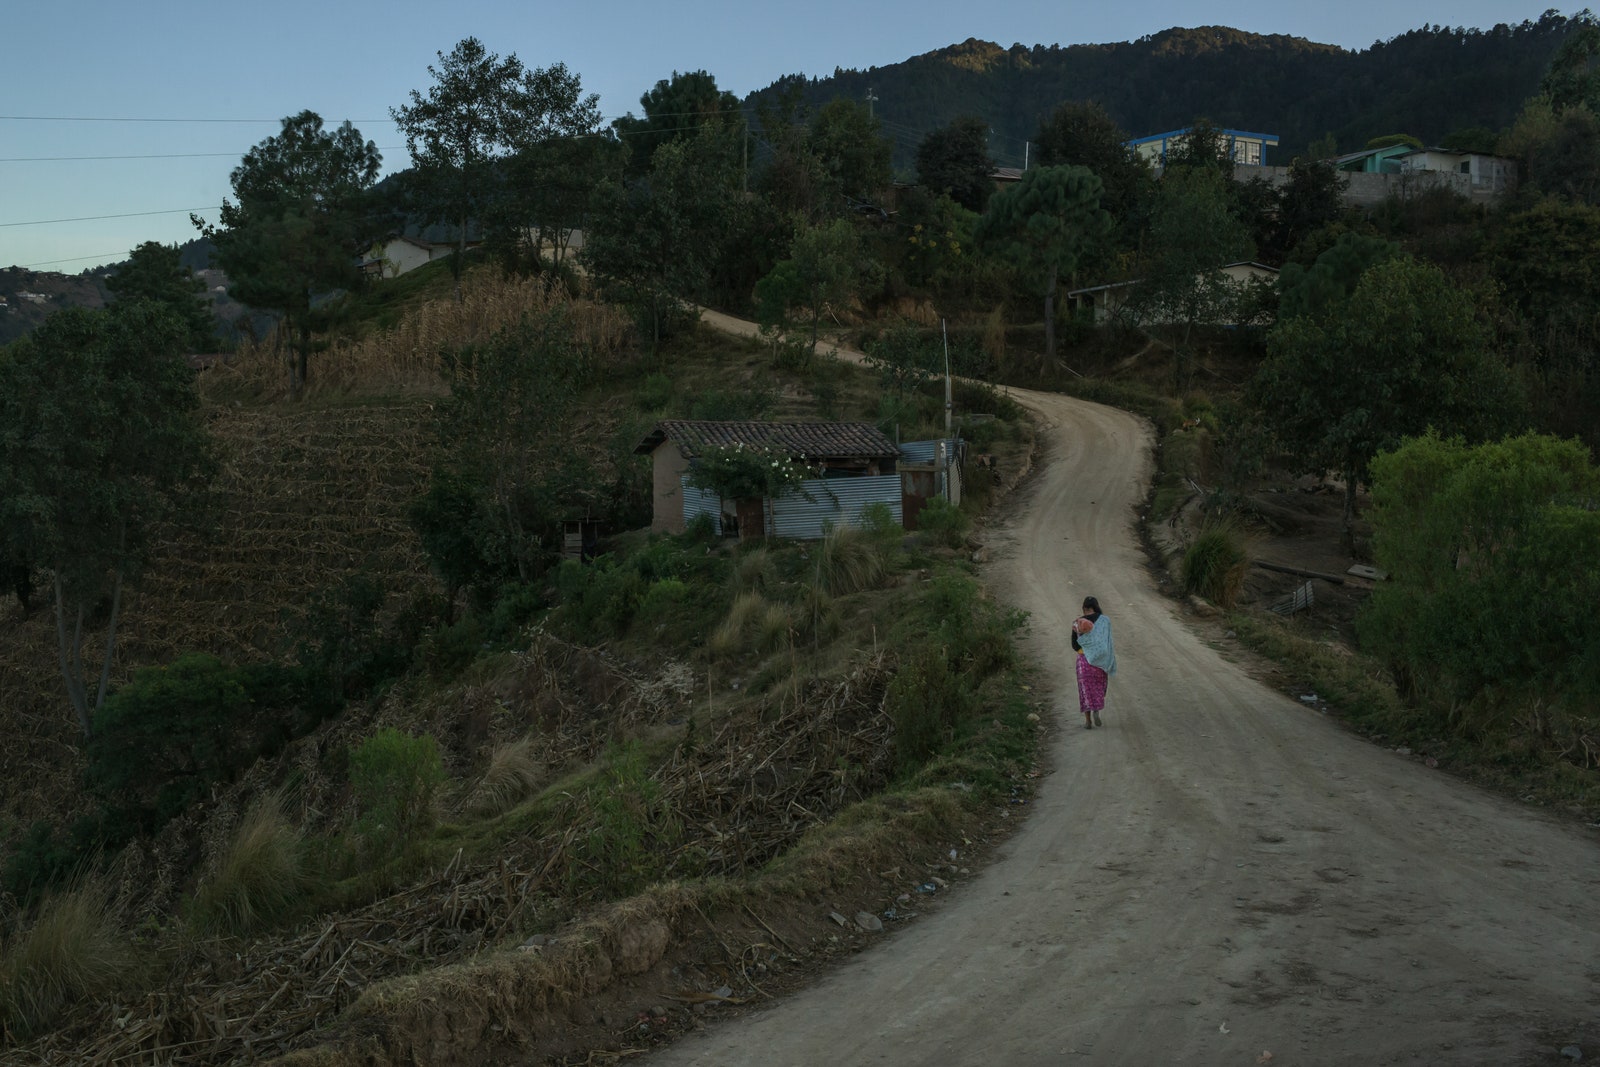 At dusk a mother walks back home with her baby.